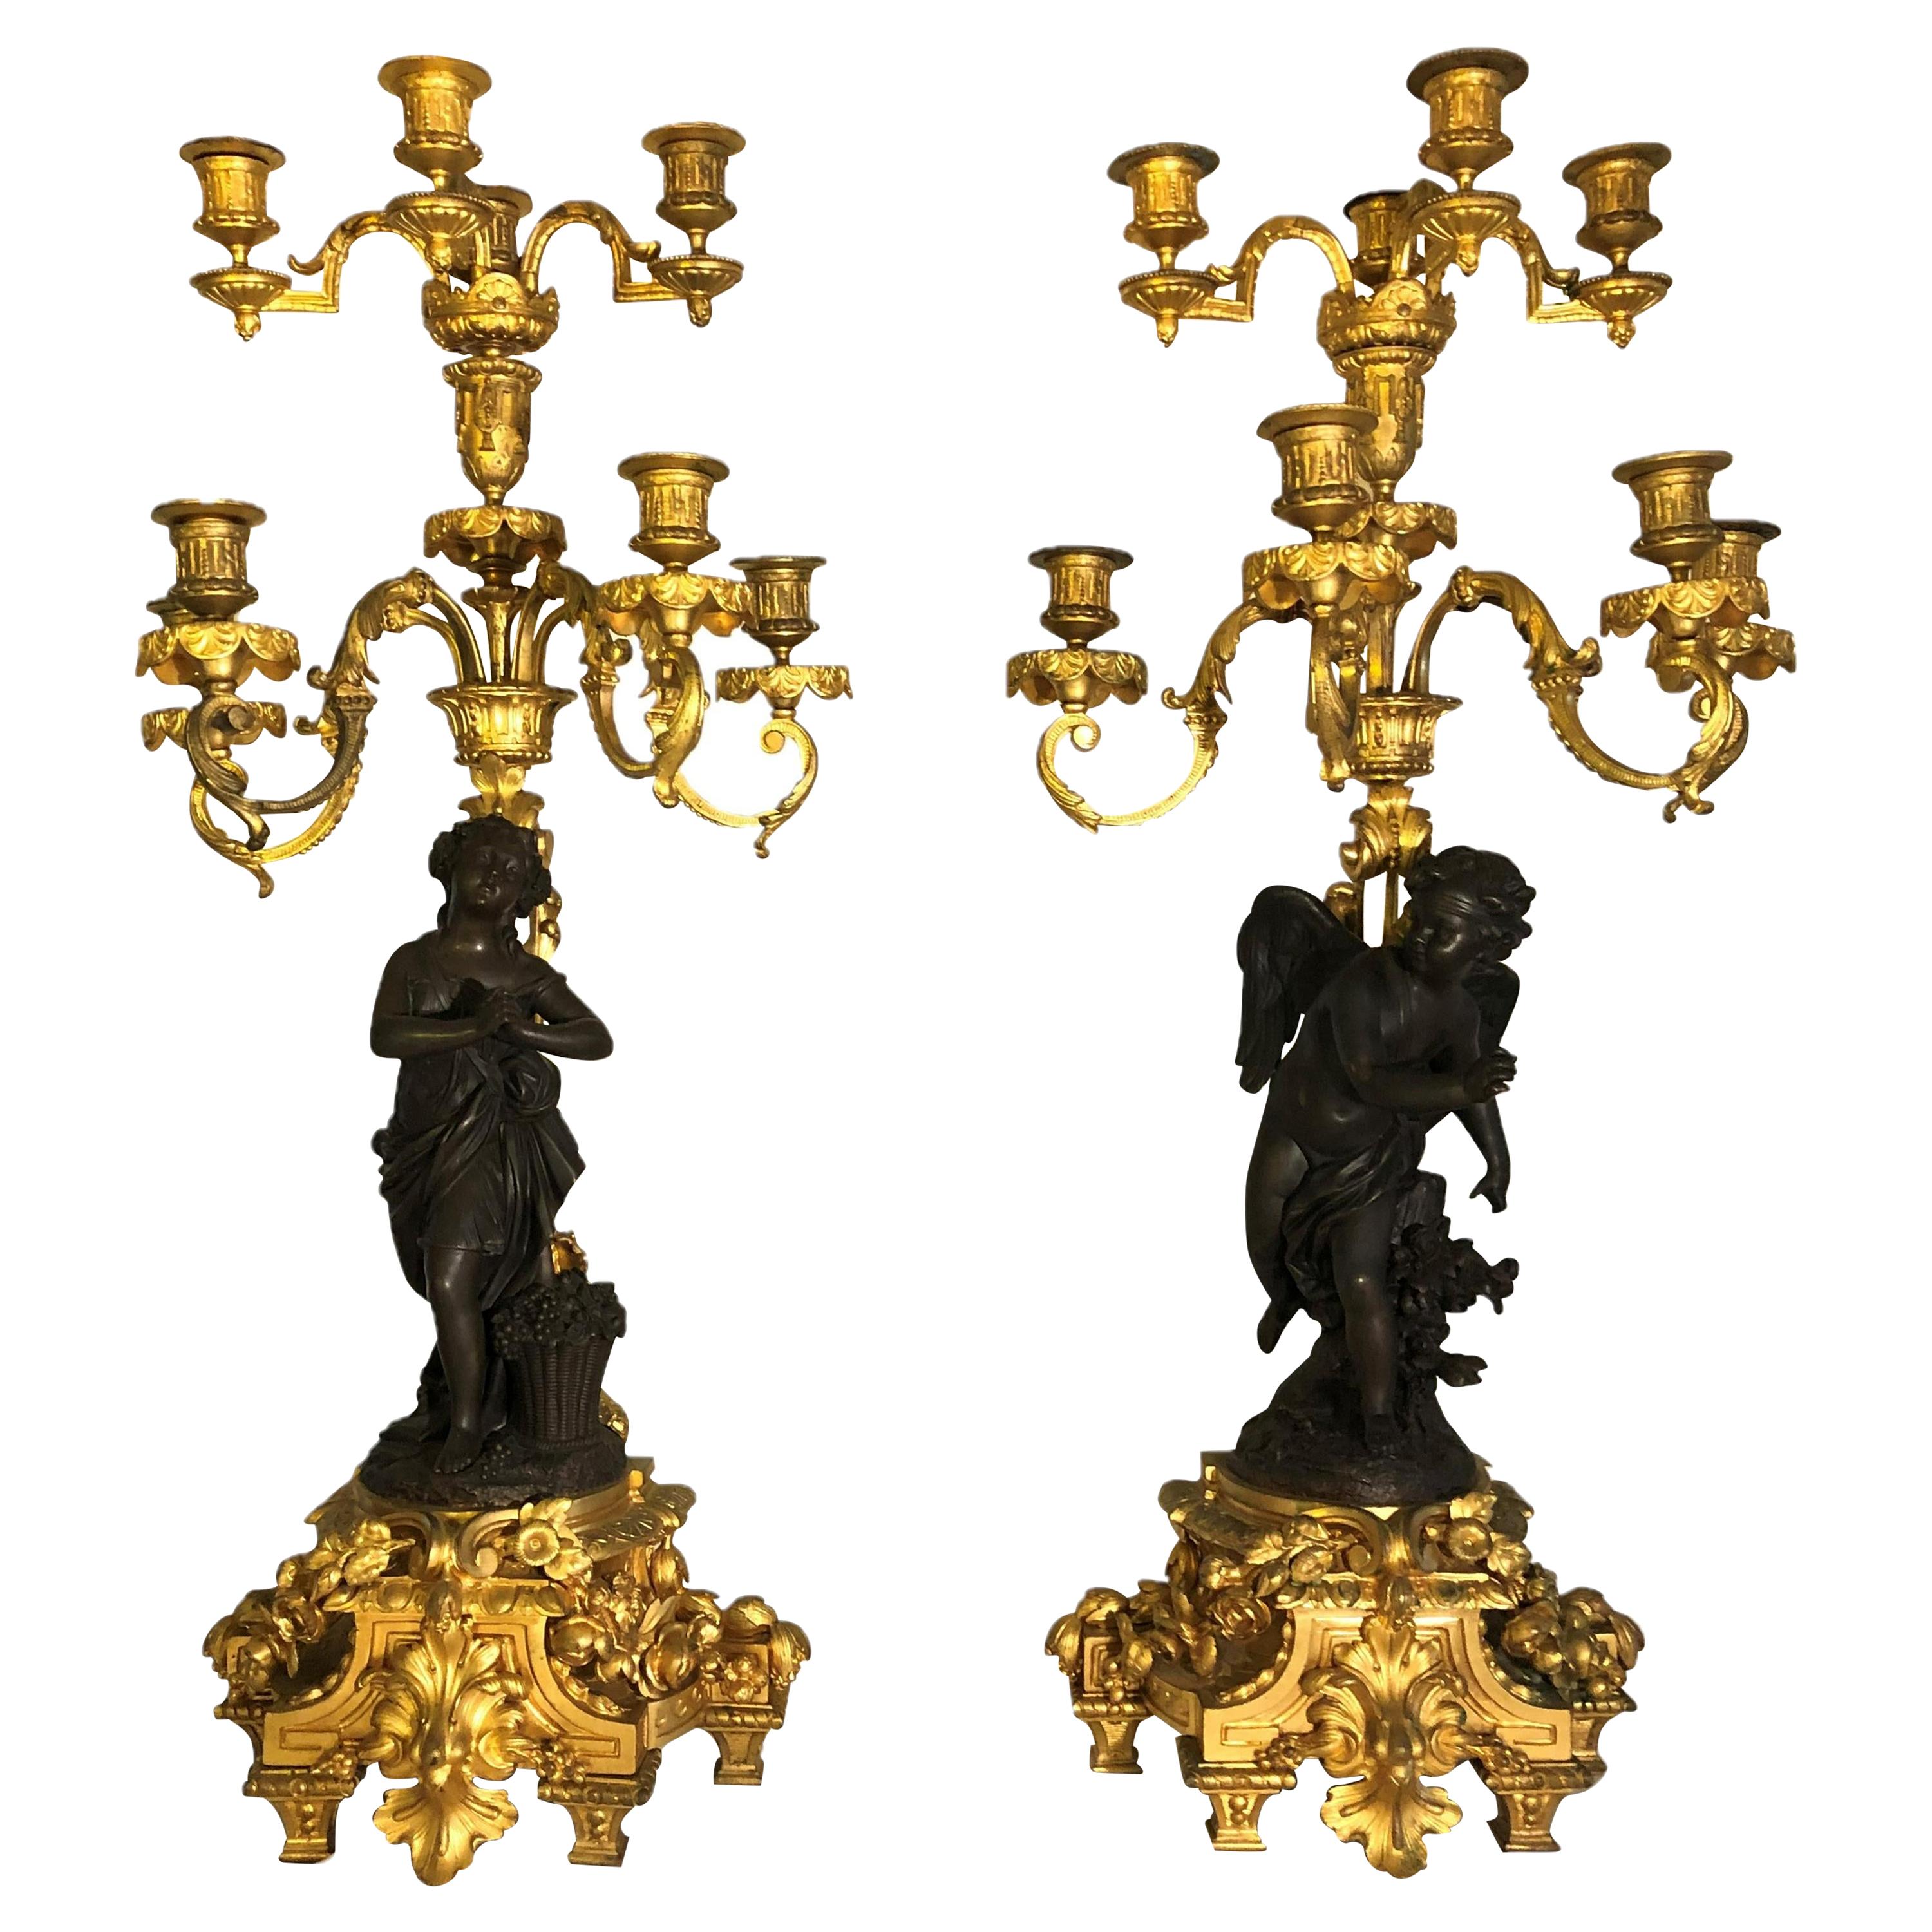 Beautiful Pair of 19th Century French Gilt Bronze and Patinted Candelabra's